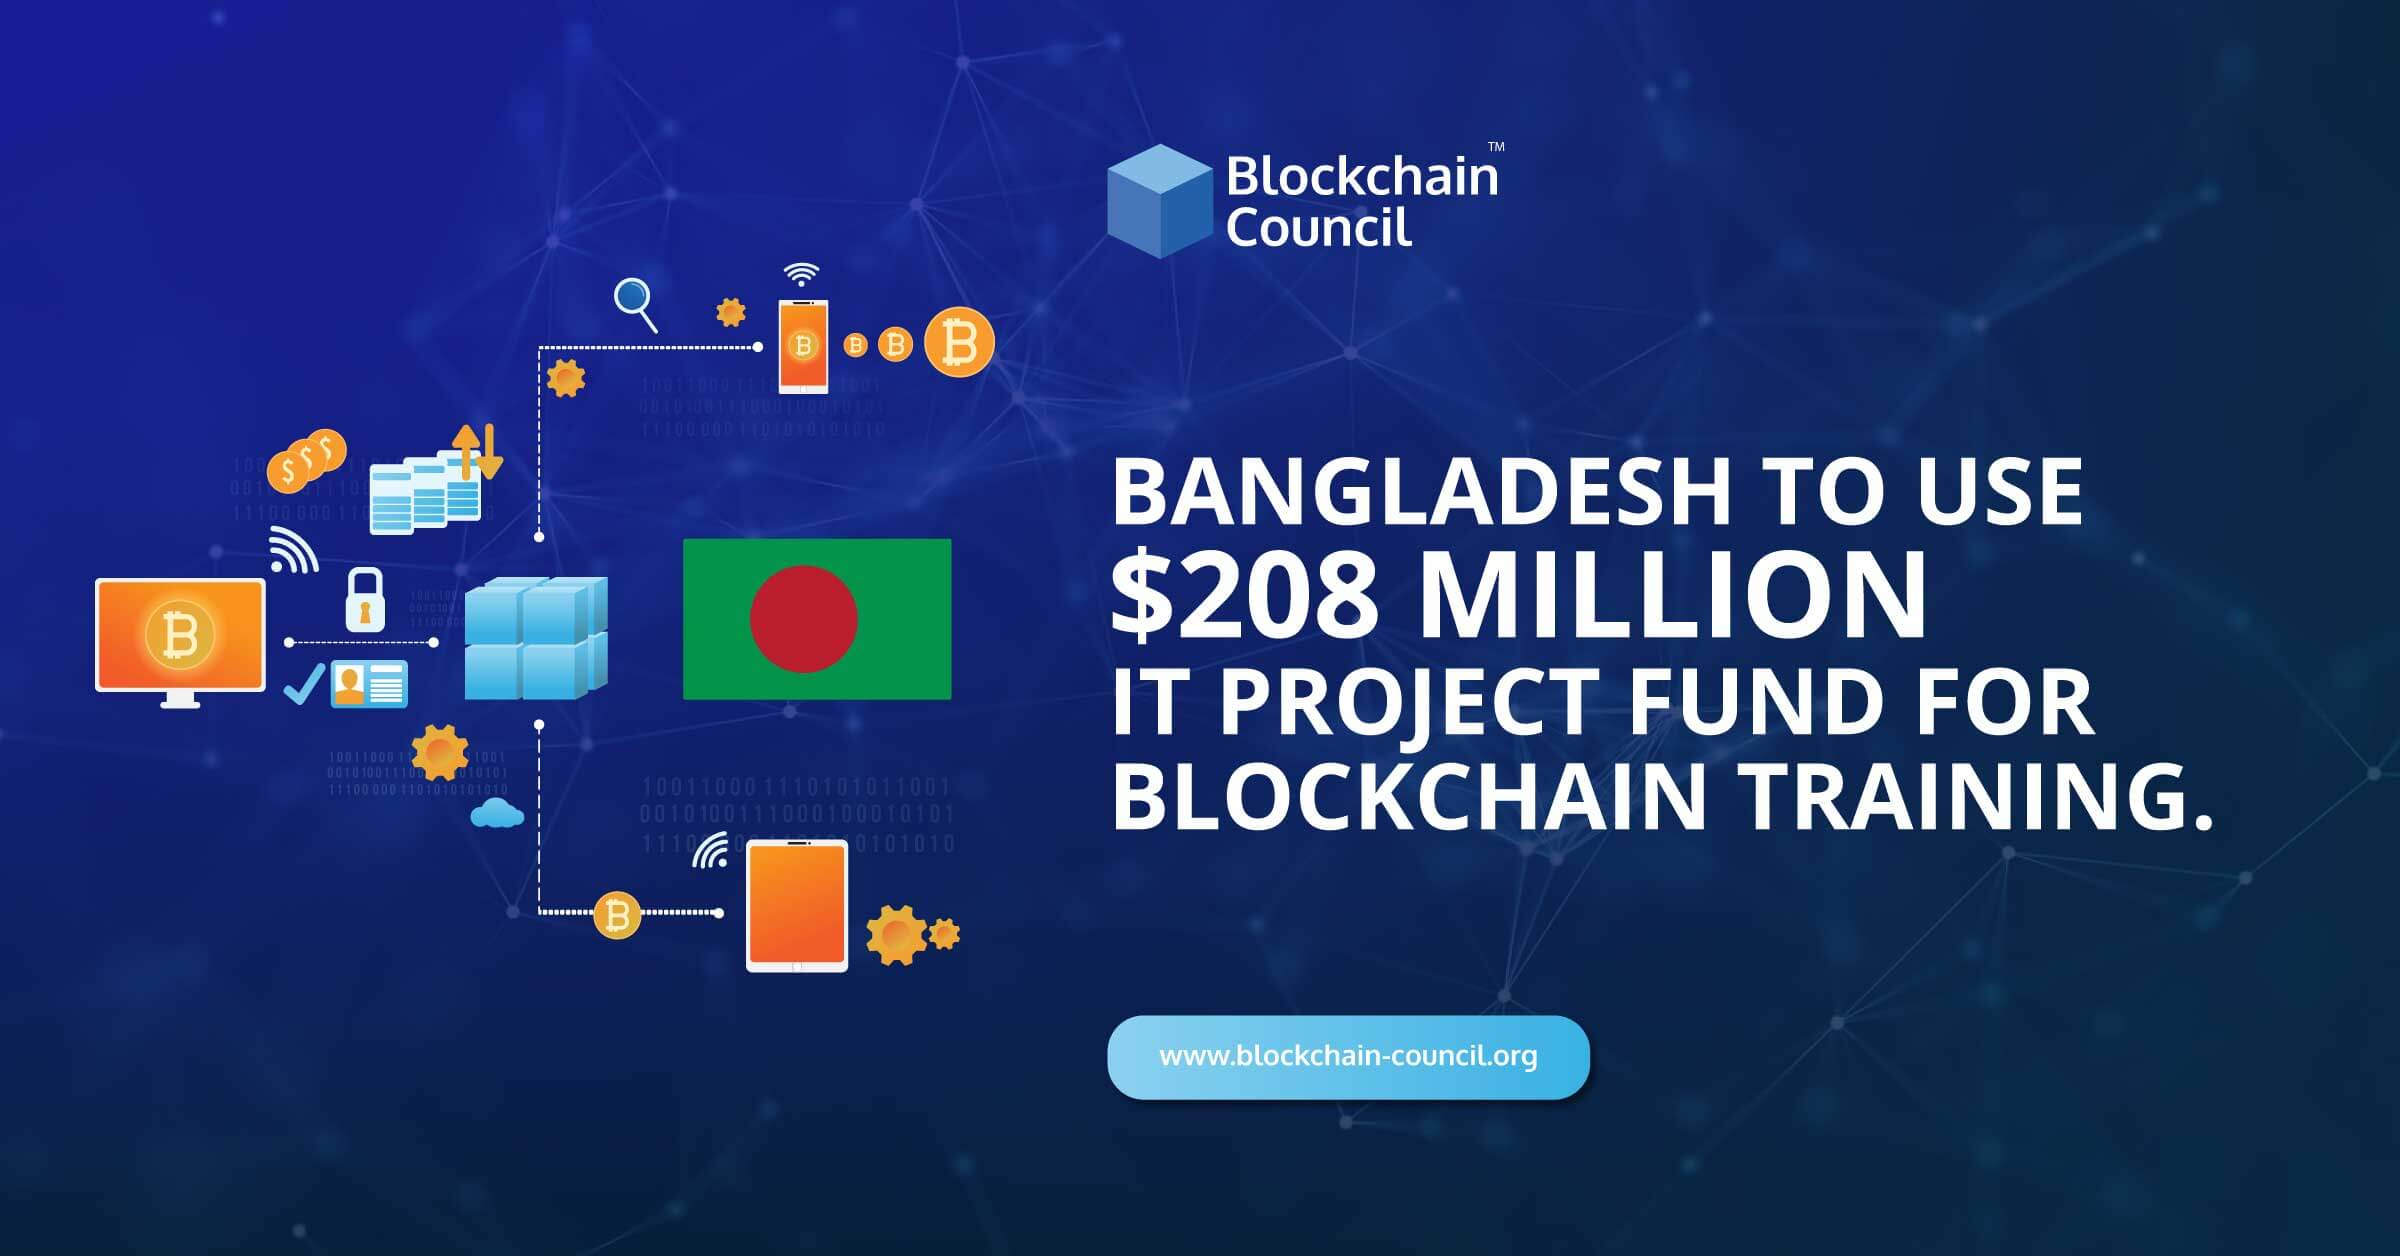 Bangladesh To Use $ 208 Million IT Project Fund For Blockchain Training